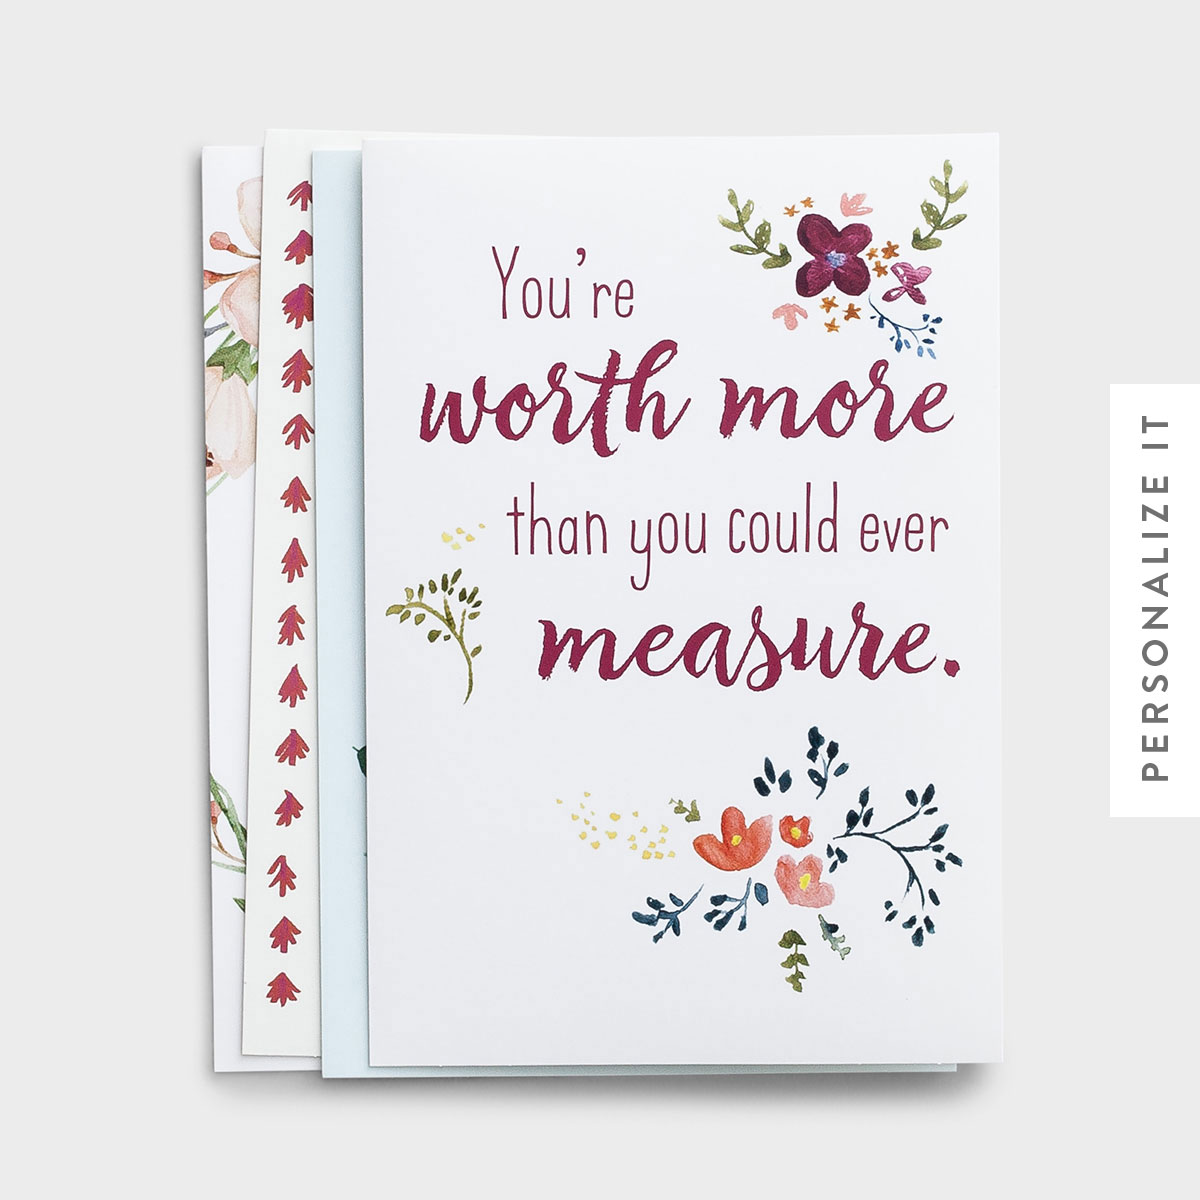 encouragement-words-that-encourage-12-boxed-cards-free-delivery